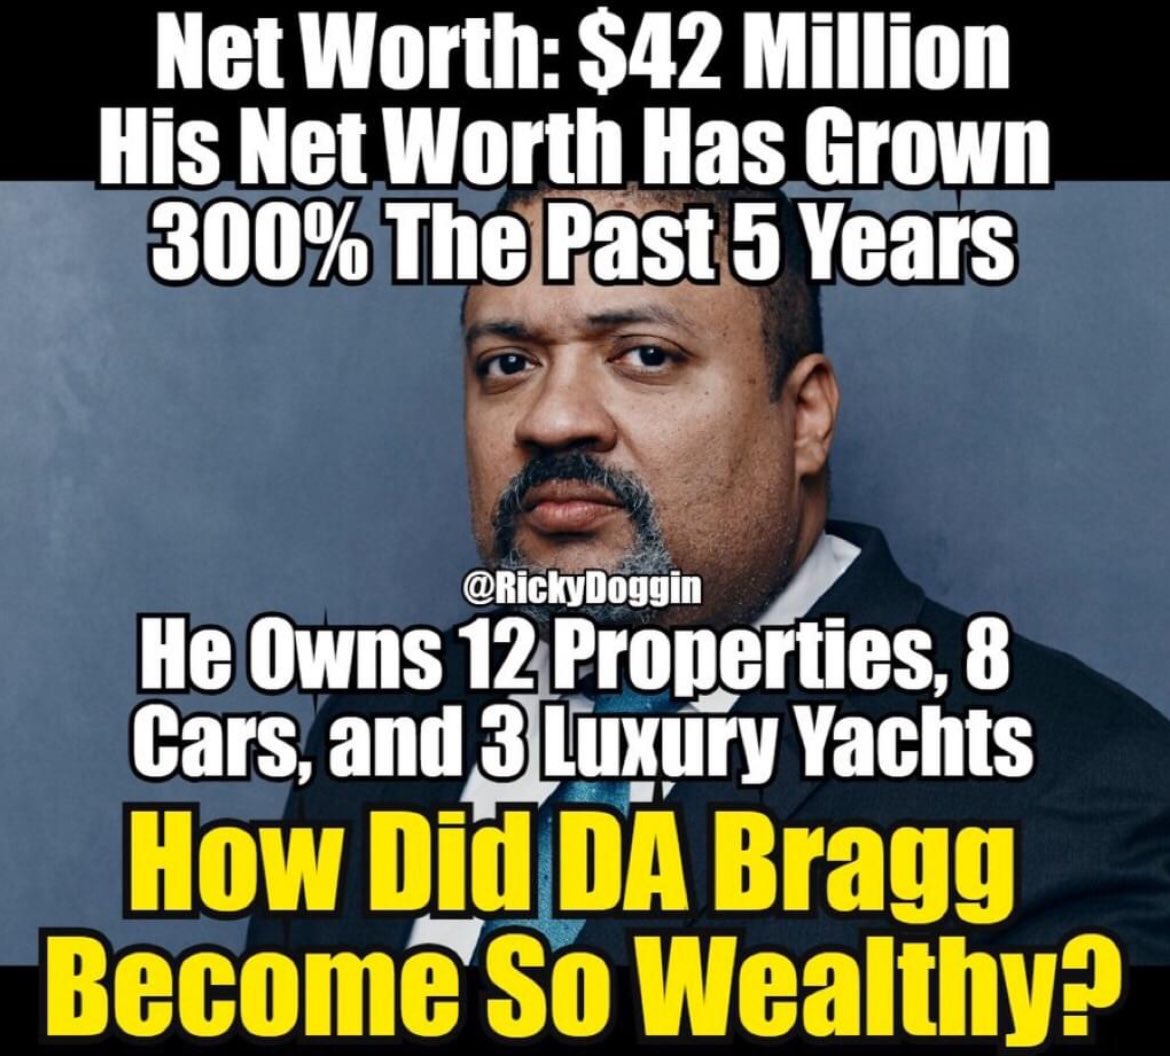 There’s the crime,  fat boy didn’t earn this money.  Let’s look at his books I bet we find a crime.